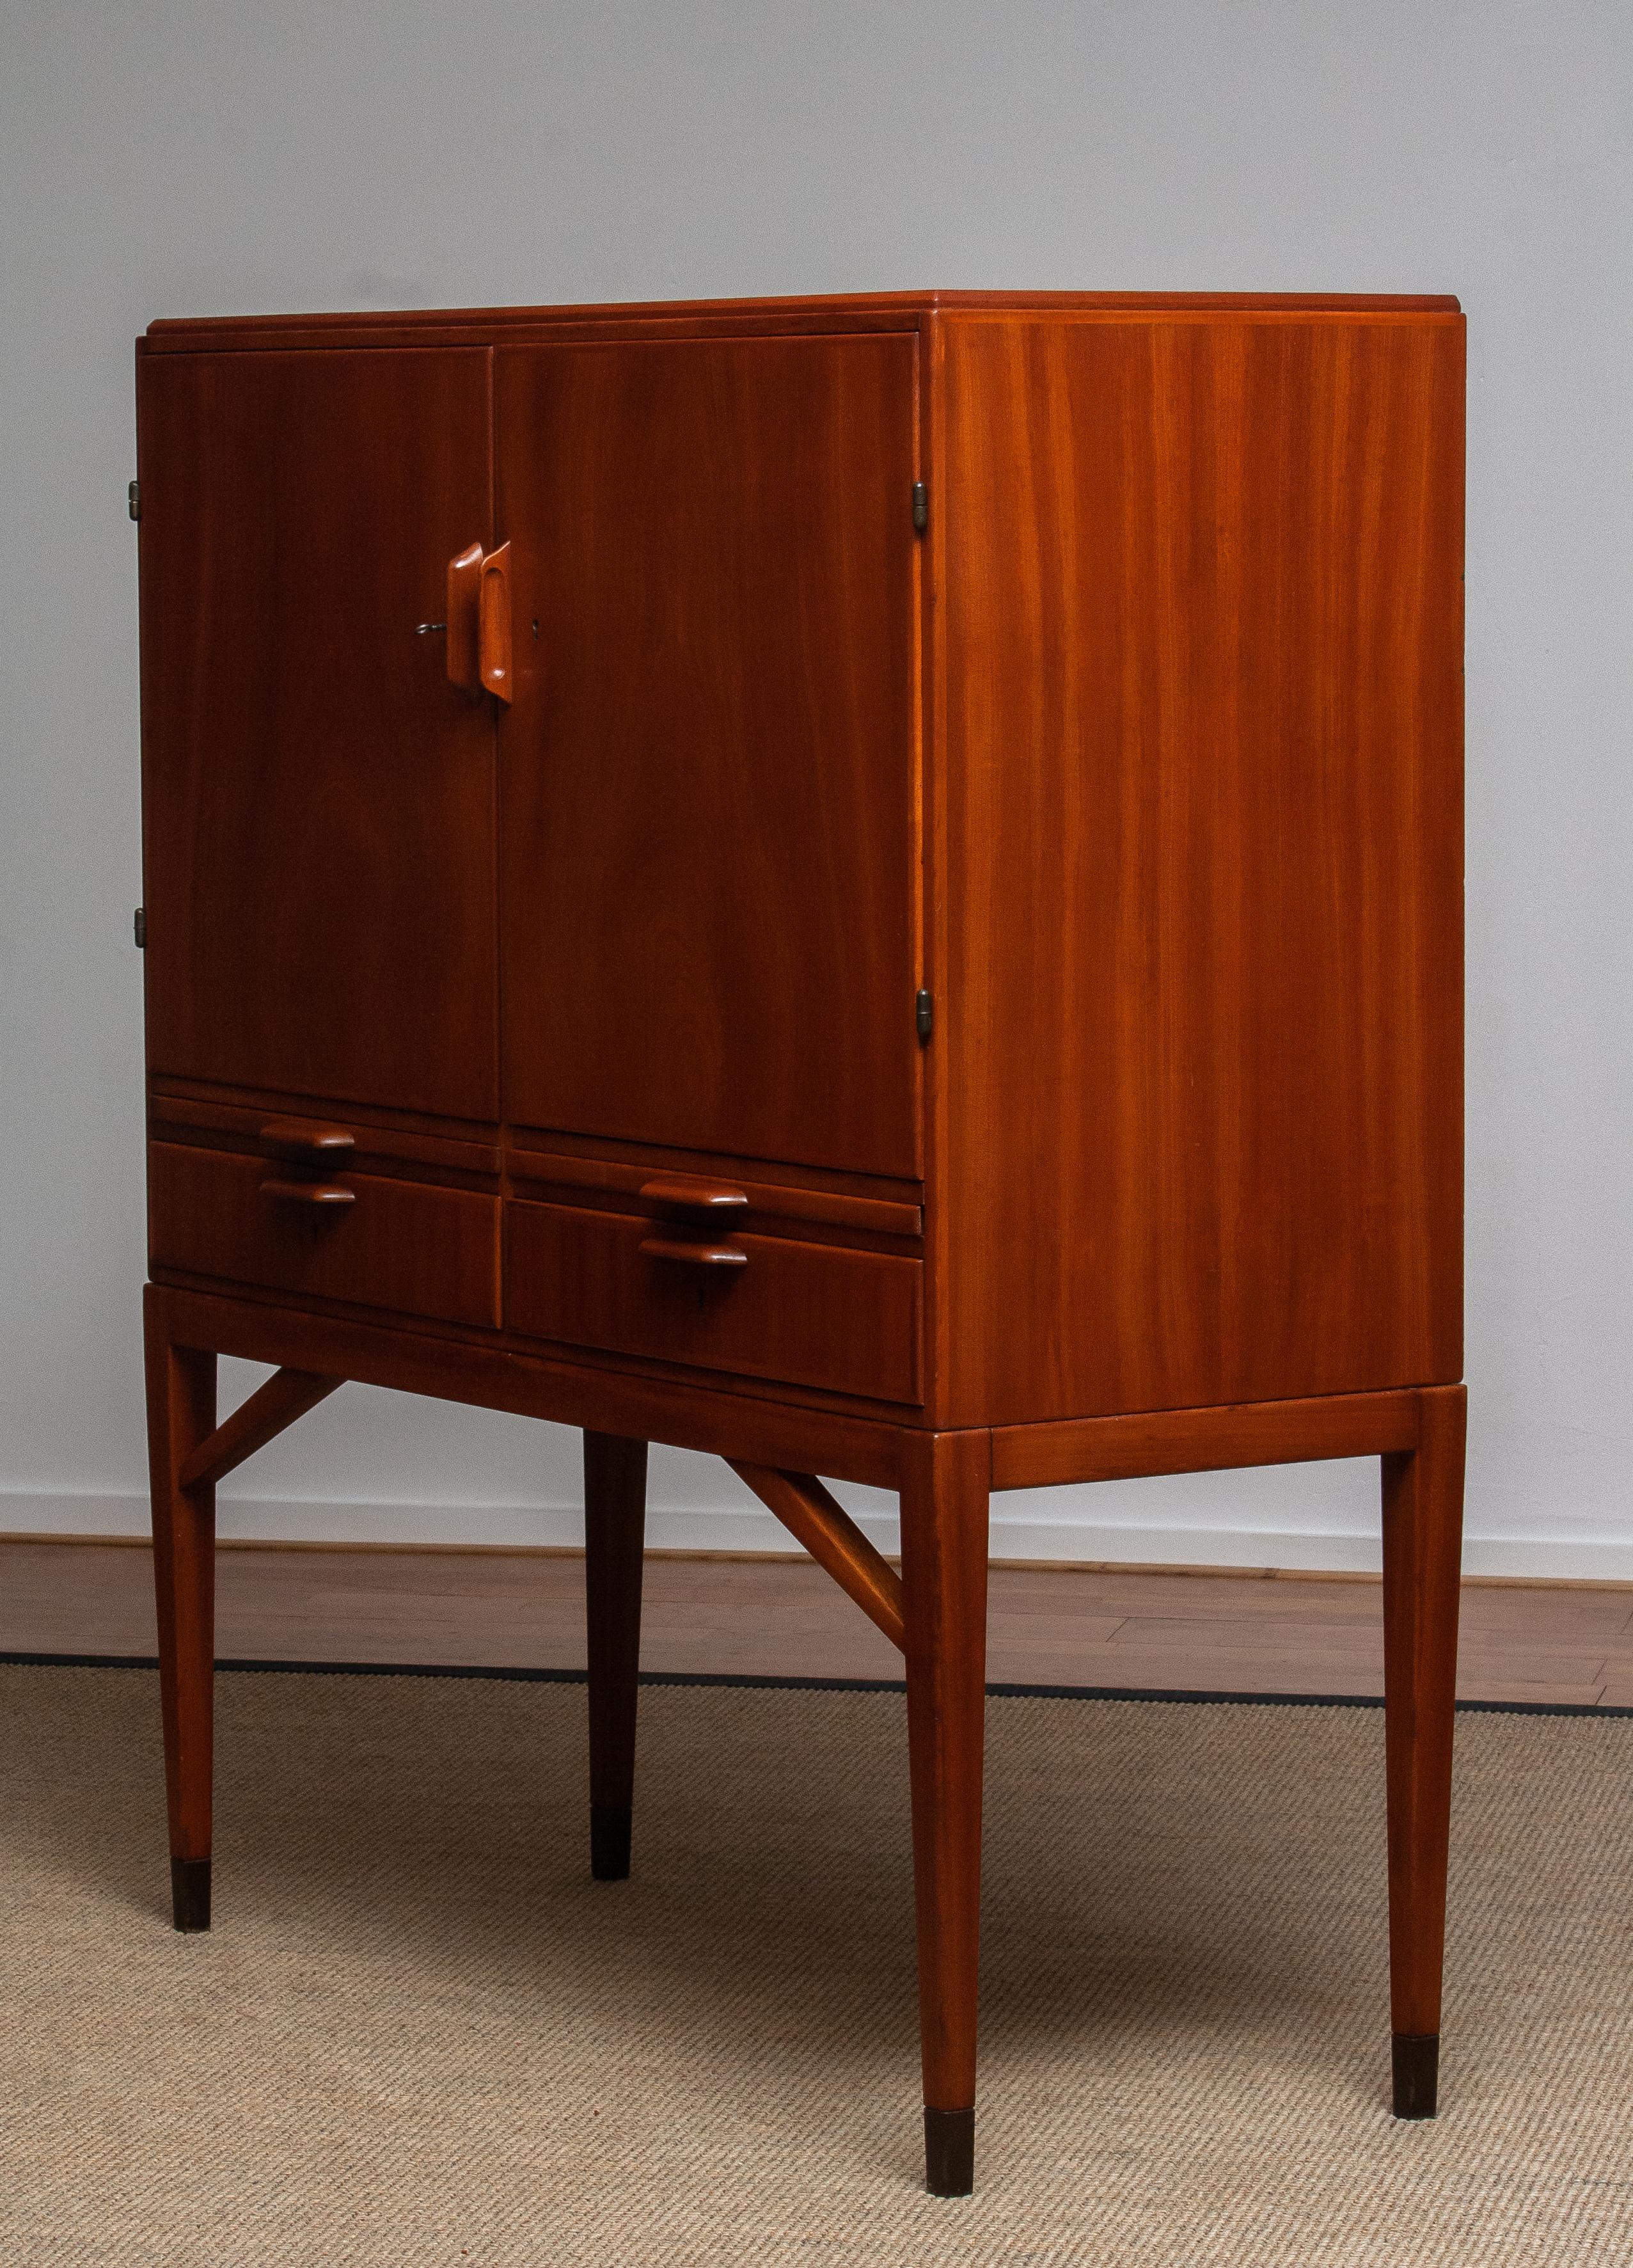 1950s, High Quality Mahogany Dry Bar / Cabinet Made by Marbo Sweden, SMI Labeled 14